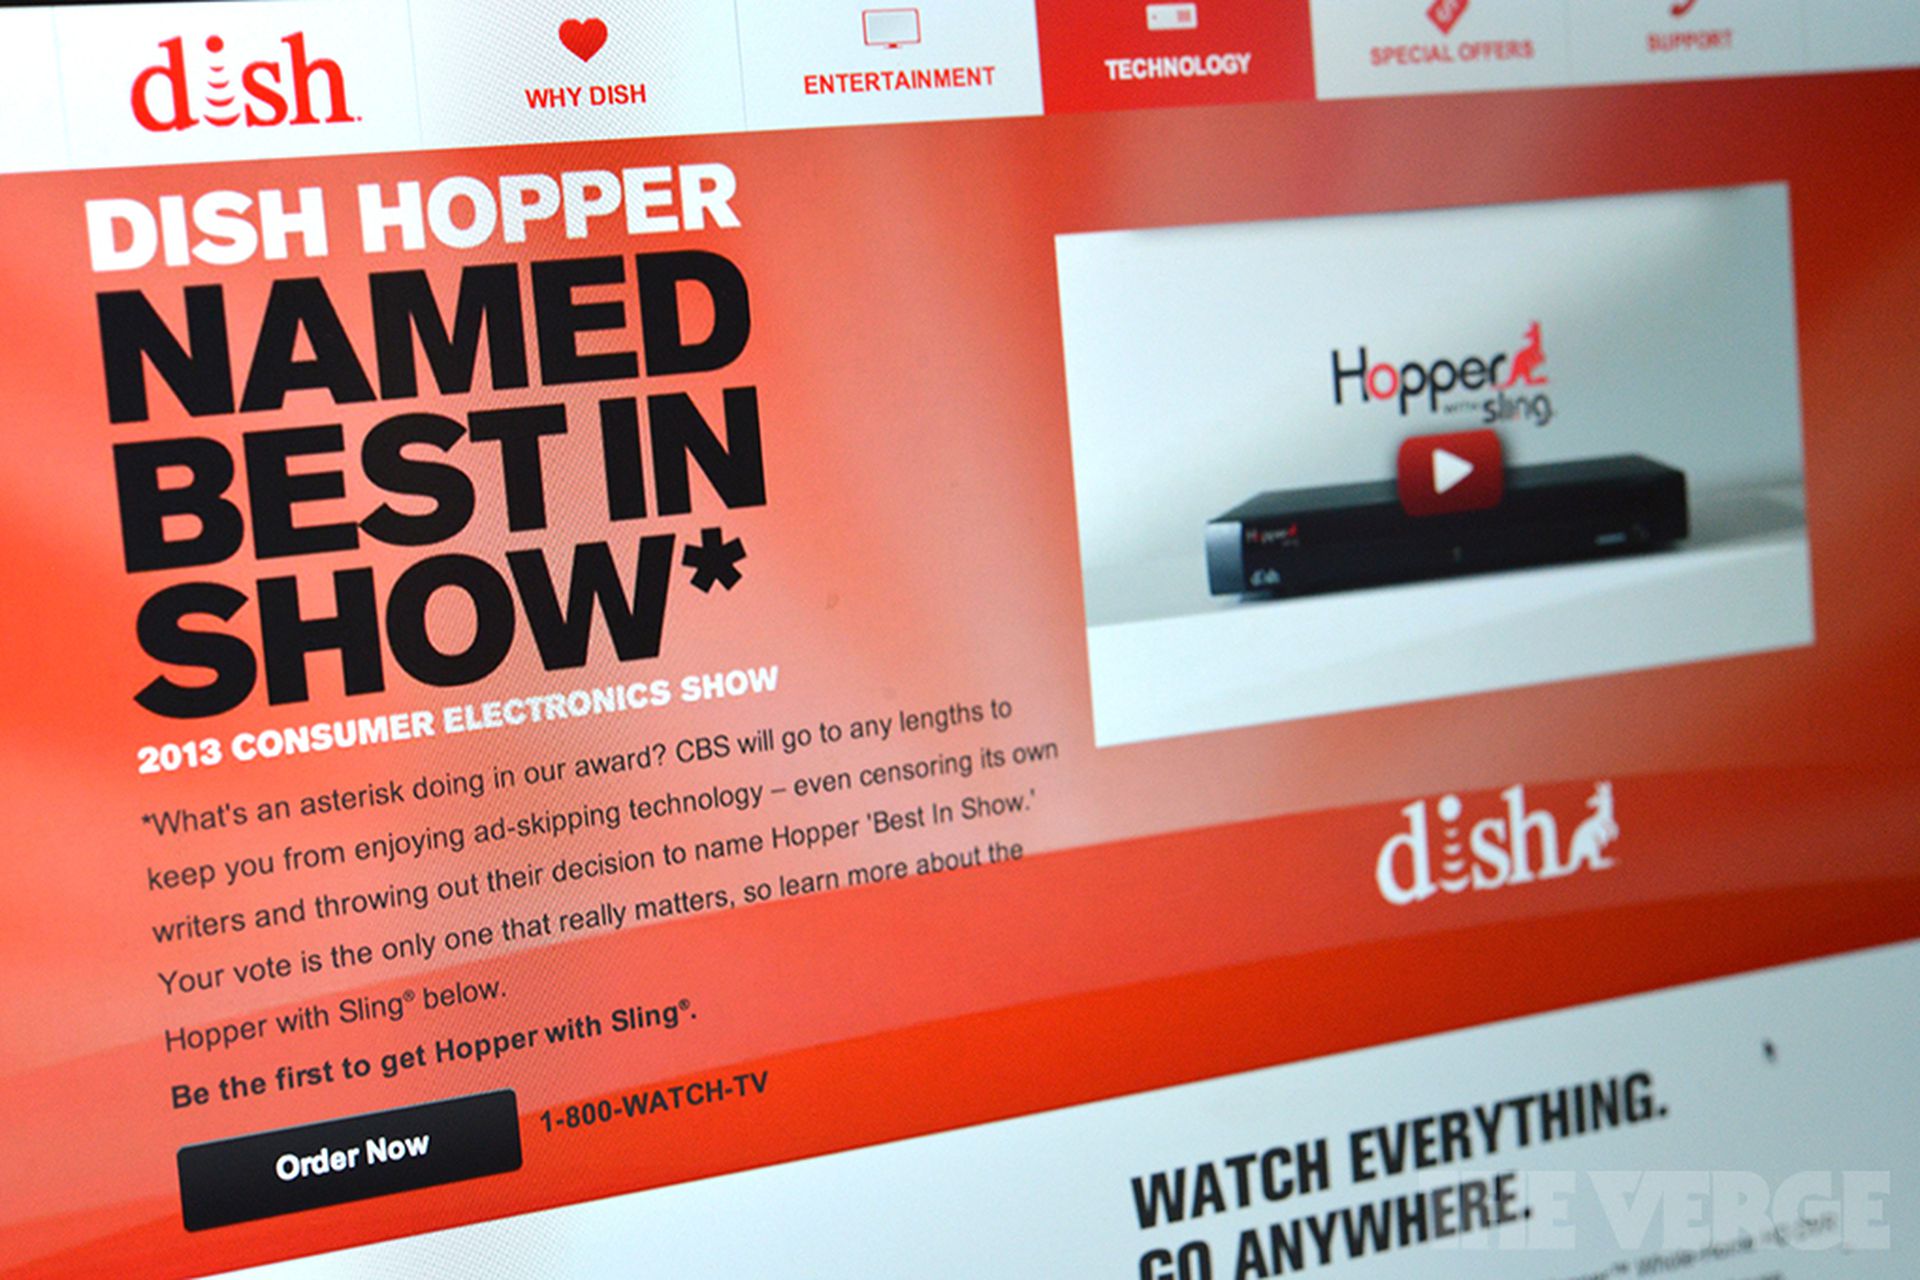 Dish gives Hopper the award denied to it by CBS The Verge